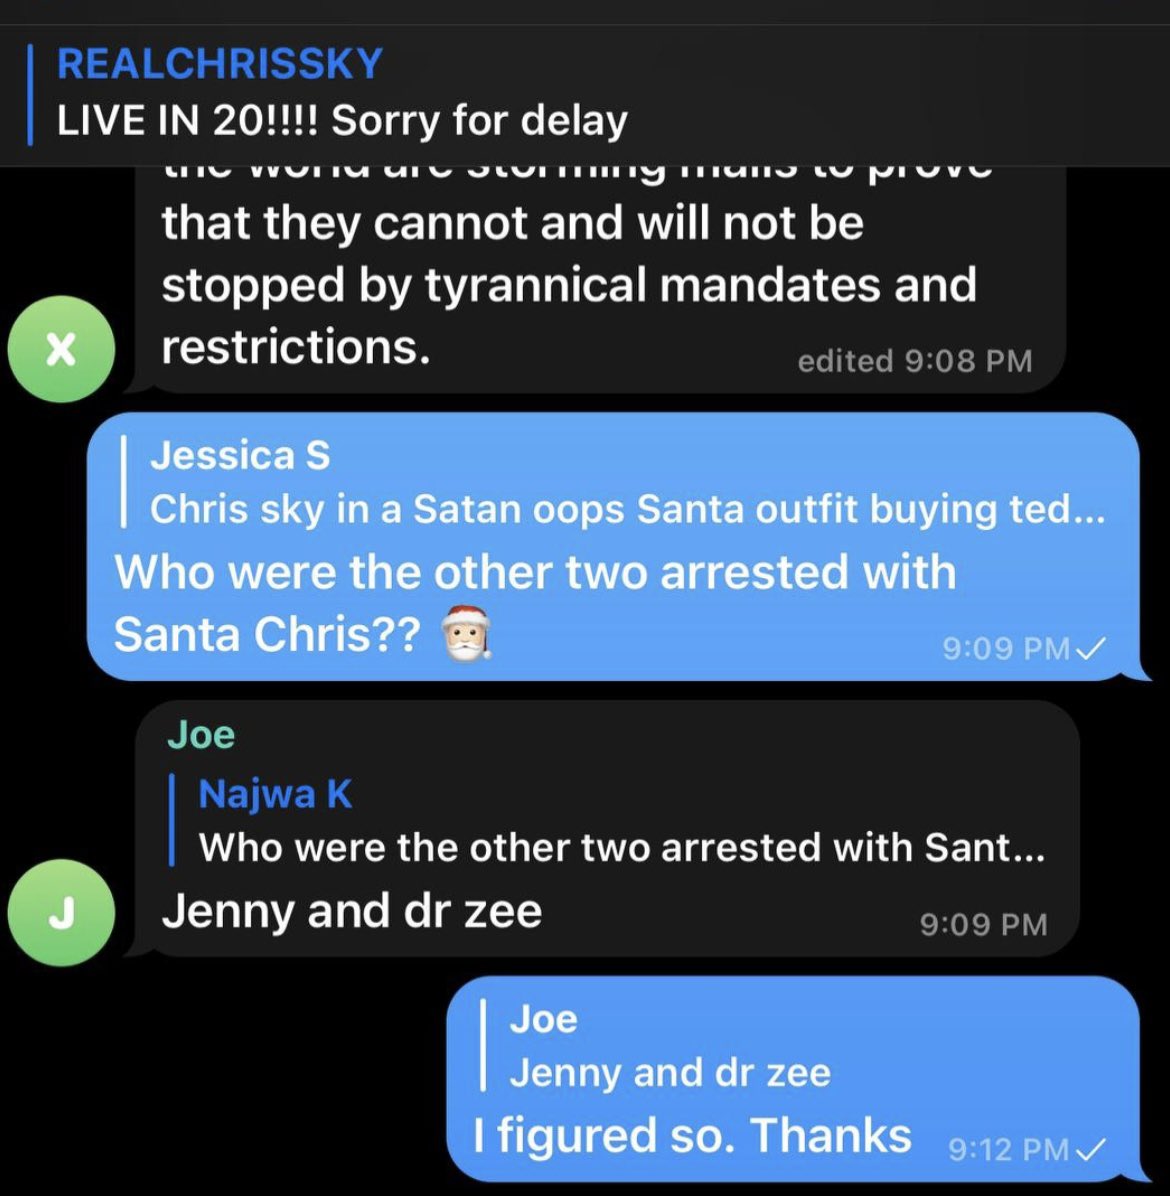 I’m hearing that the other two arrested today at WEM were Jenny Saccocia and Dr Zee/Zeeshan Ahmed.

Good. https://t.co/AWsB0kSV8z